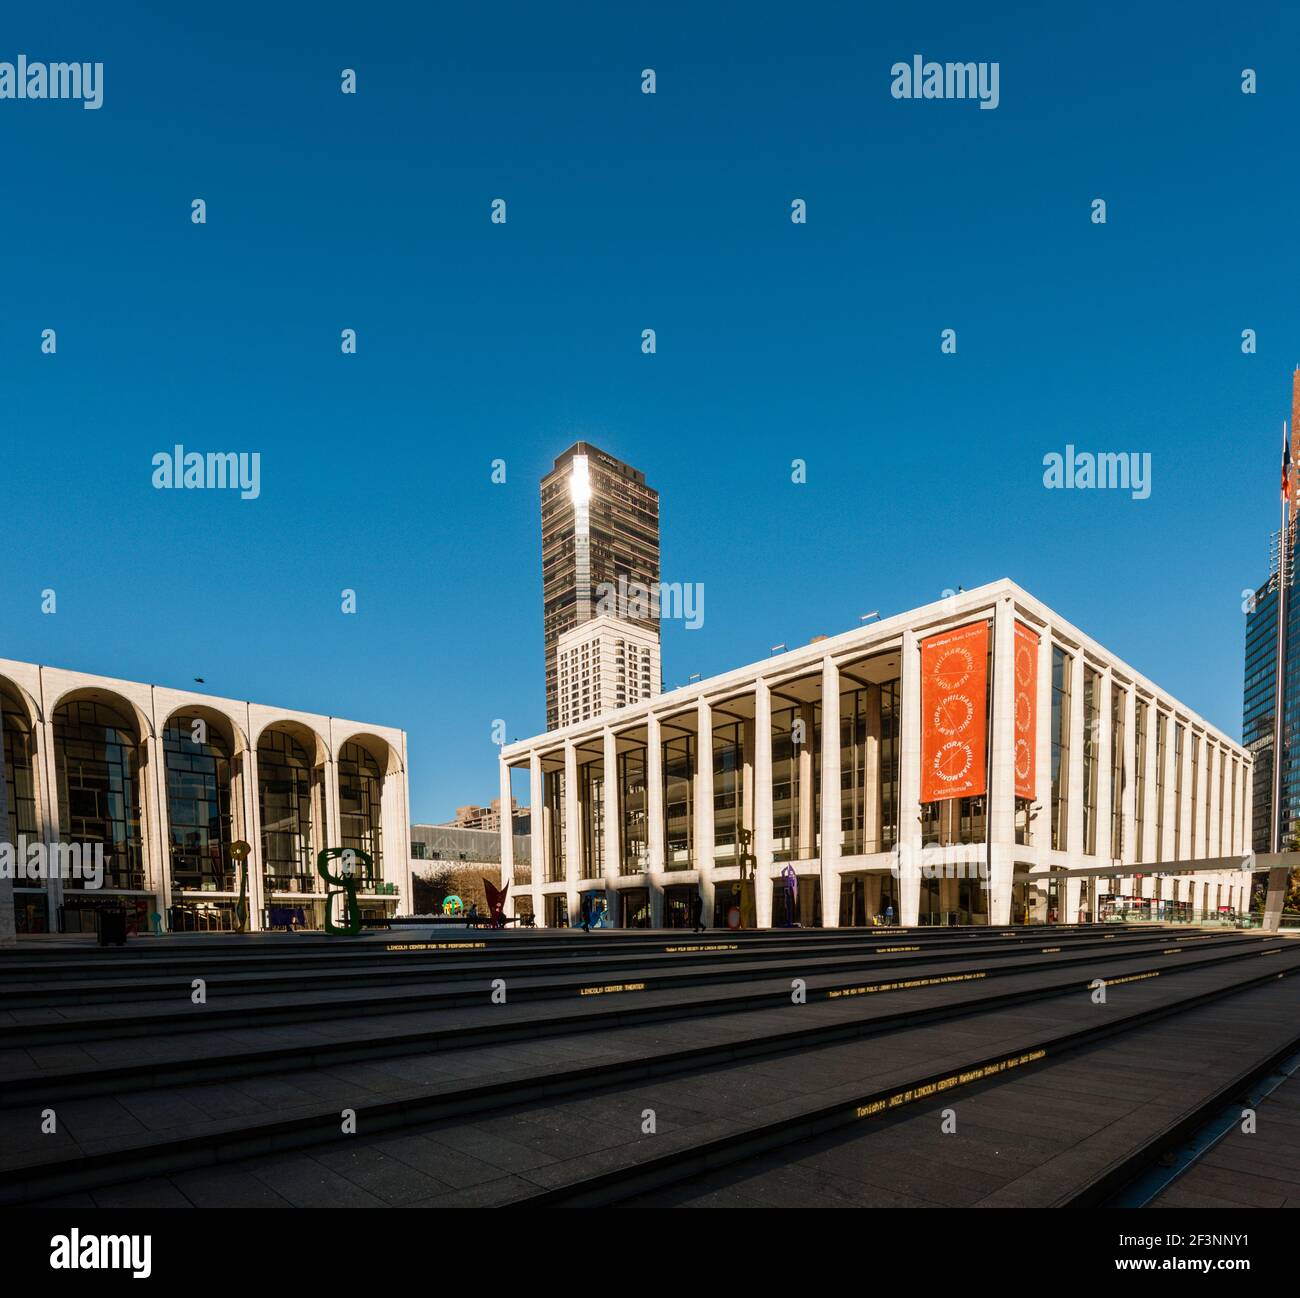 Die Palza im Lincoln Center for the Performing Arts Stockfoto